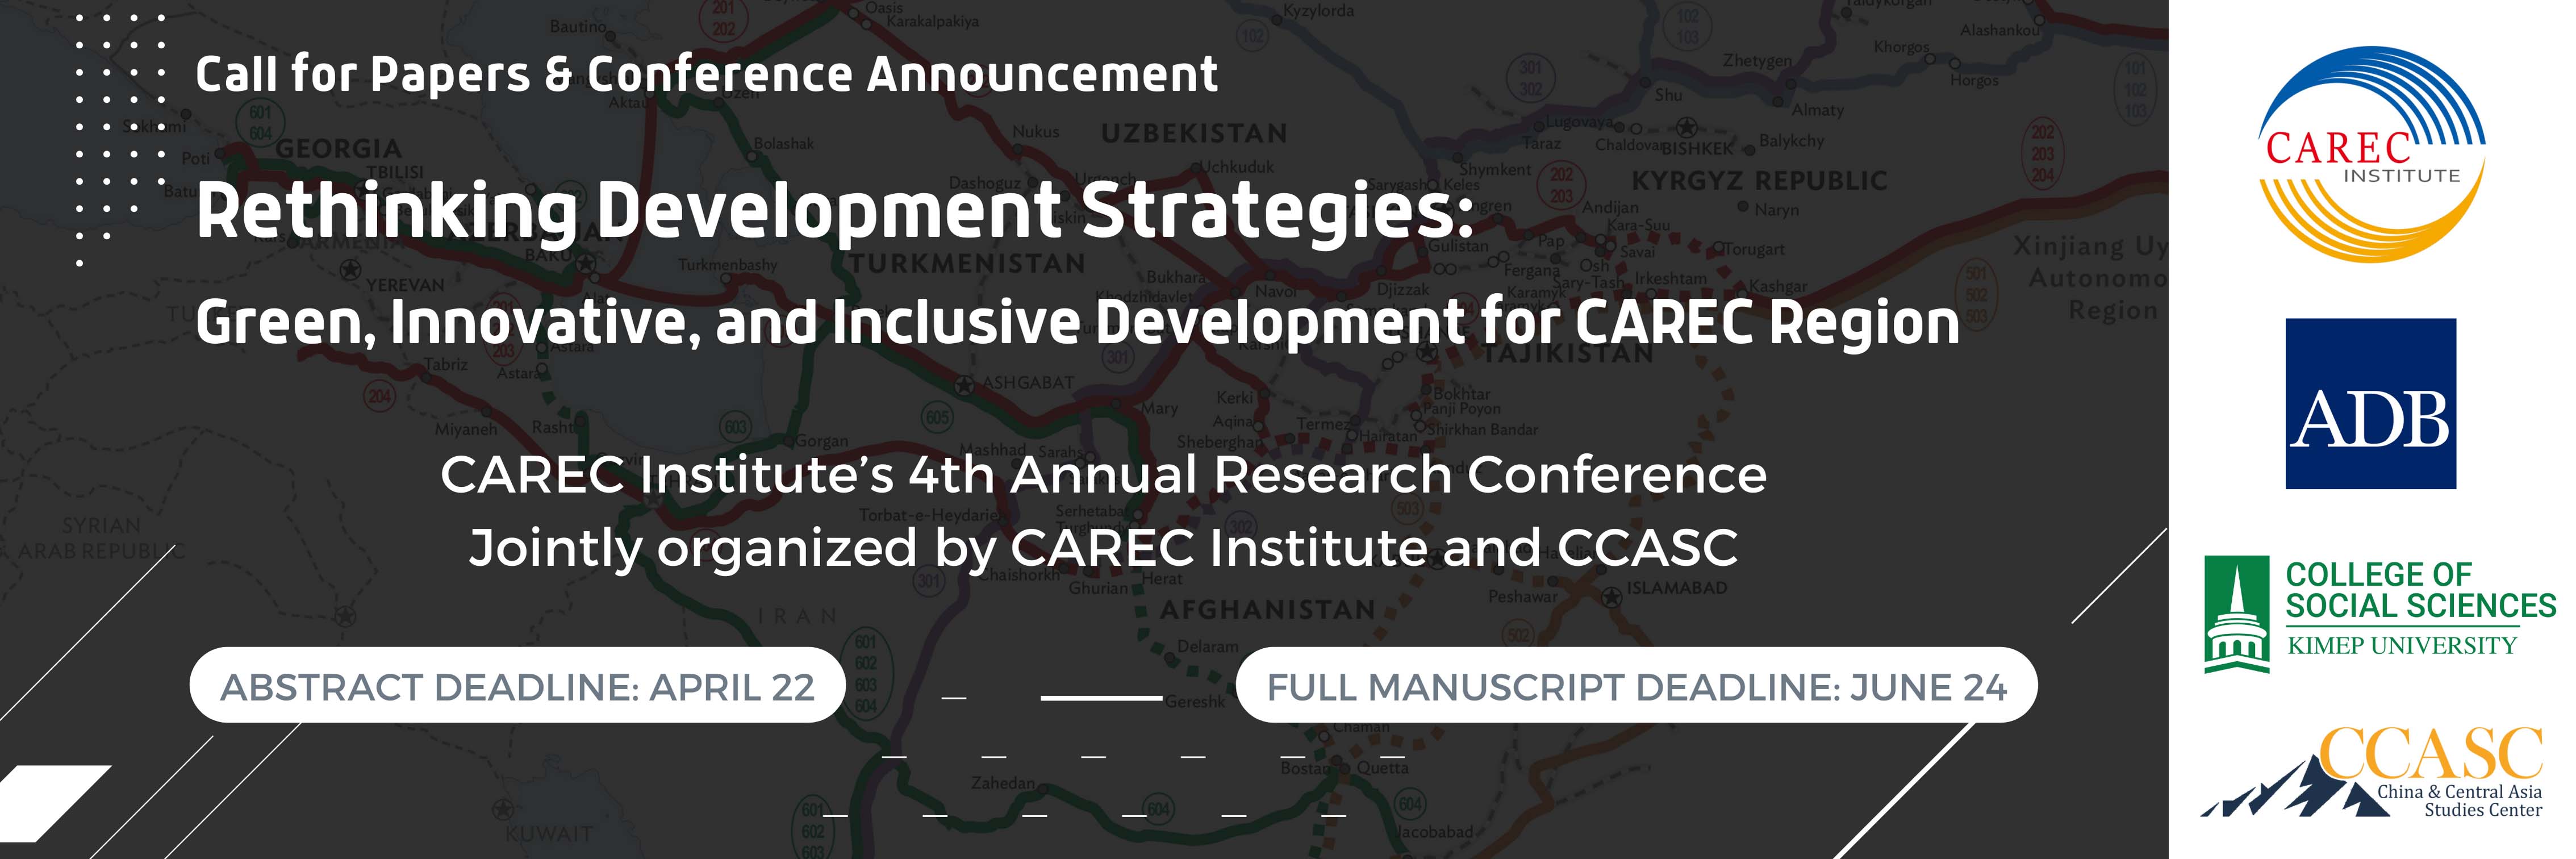 Call for Papers: Rethinking Development Strategies: Green, Innovative, and Inclusive Development for the CAREC region. Deadline for Abstracts: April 22